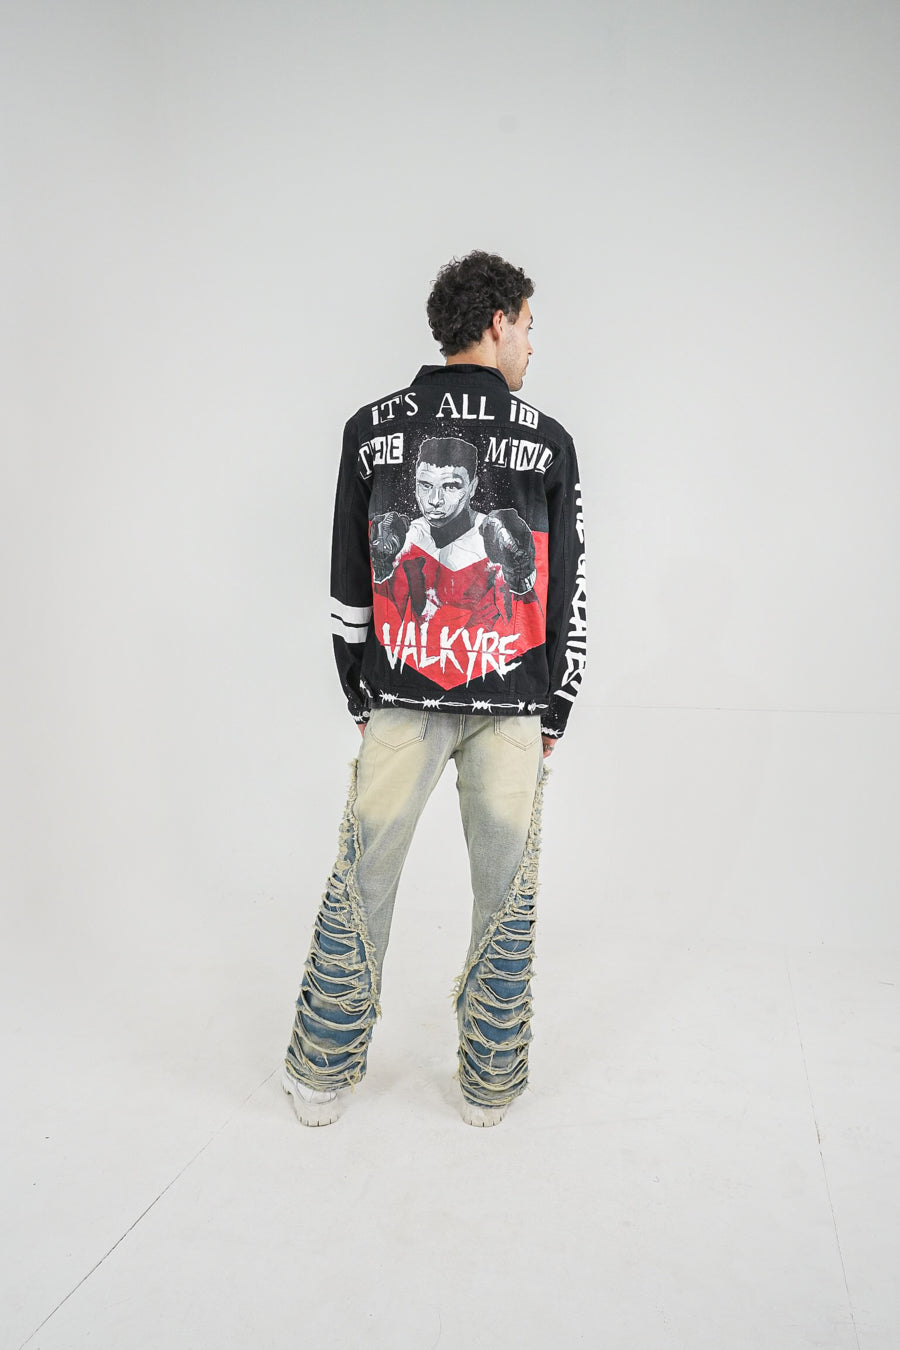 'ITS ALL IN THE MIND' VALKYRE JACKET